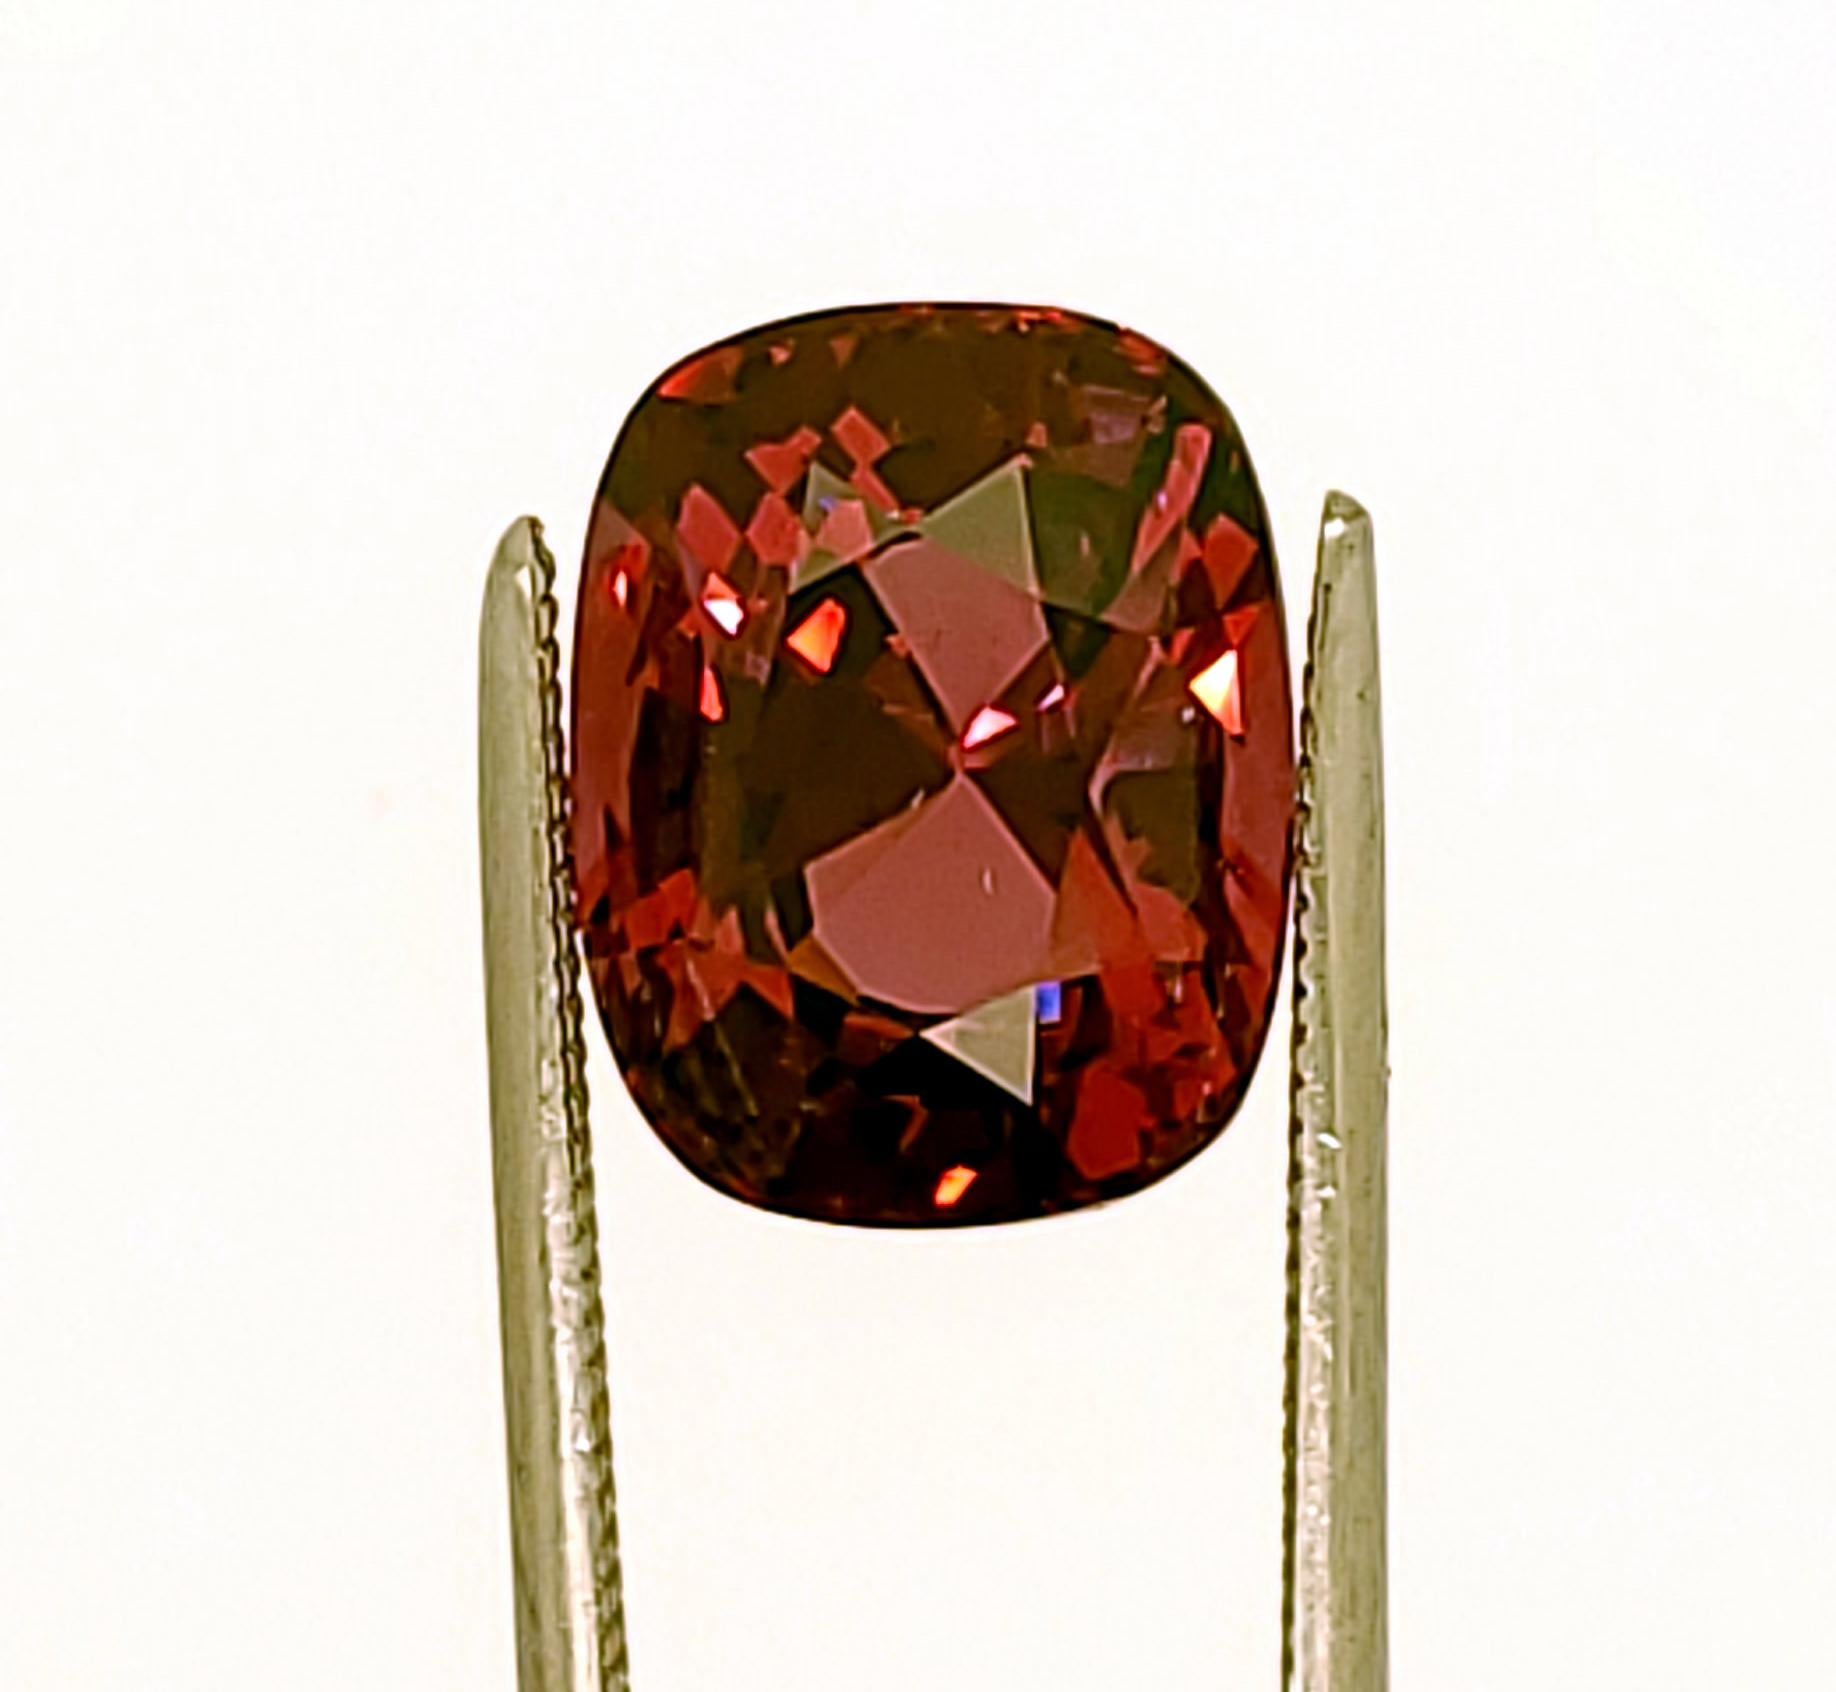 Large 4.28ct Cushion Shaped Sri Lankan (Ratnapura-Nivitigala mines) Spinel of a color that is difficult to describe, and it also color shifts (like many natural gemstones) depending on available lights and the wavelengths in those lights. Under